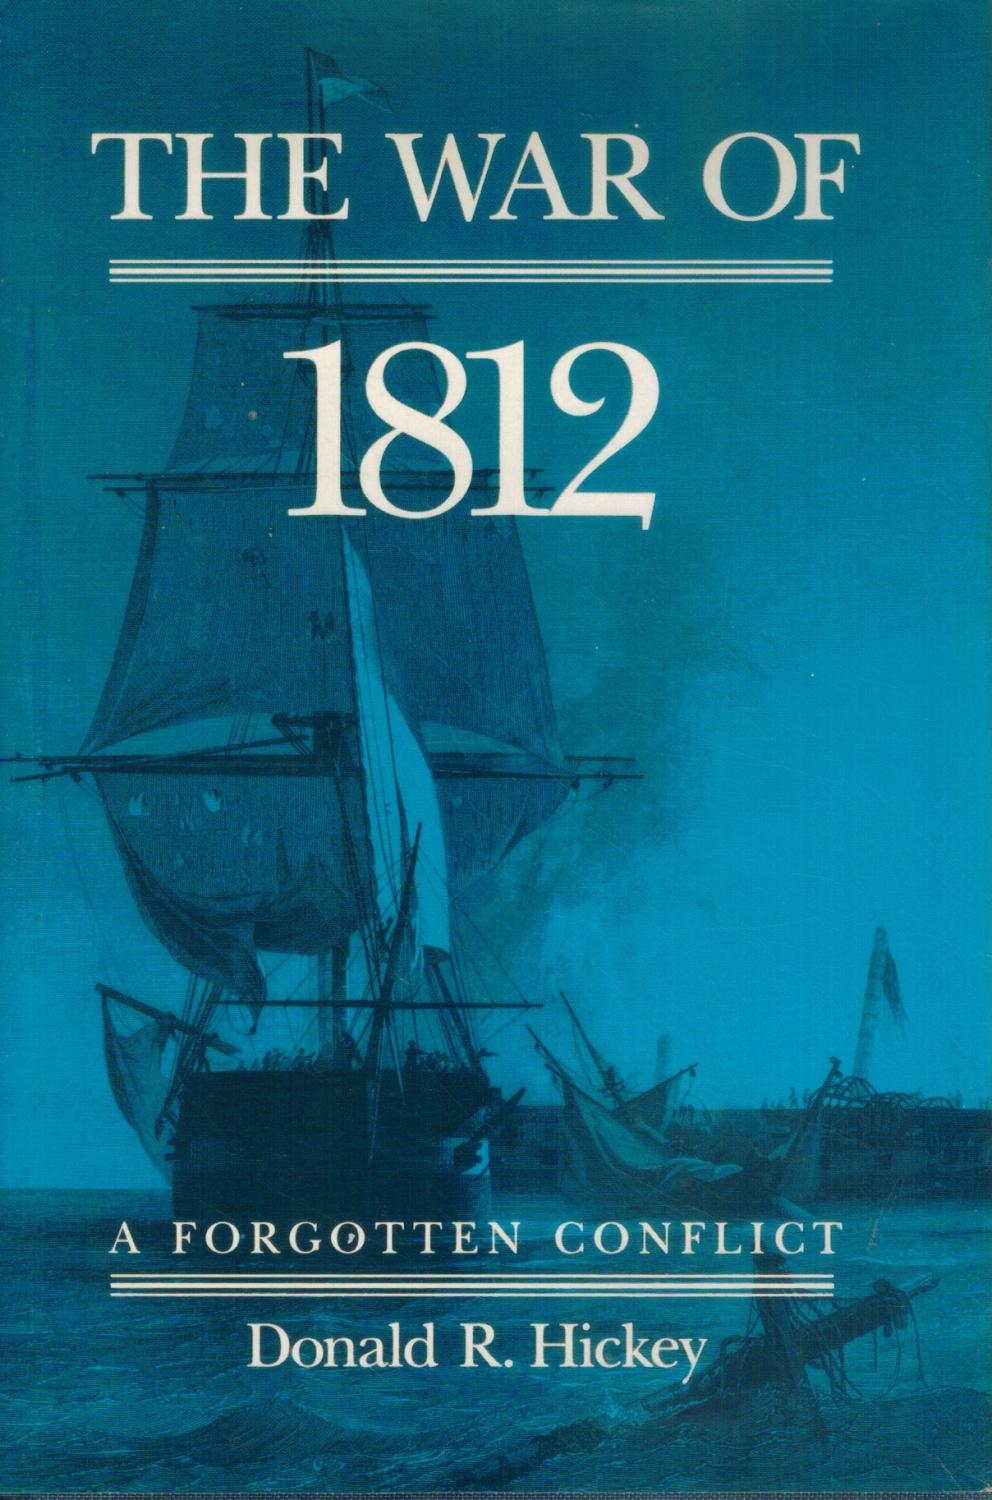 THE WAR OF 1812 A Forgotten Conflict - Hickey, Donald R.